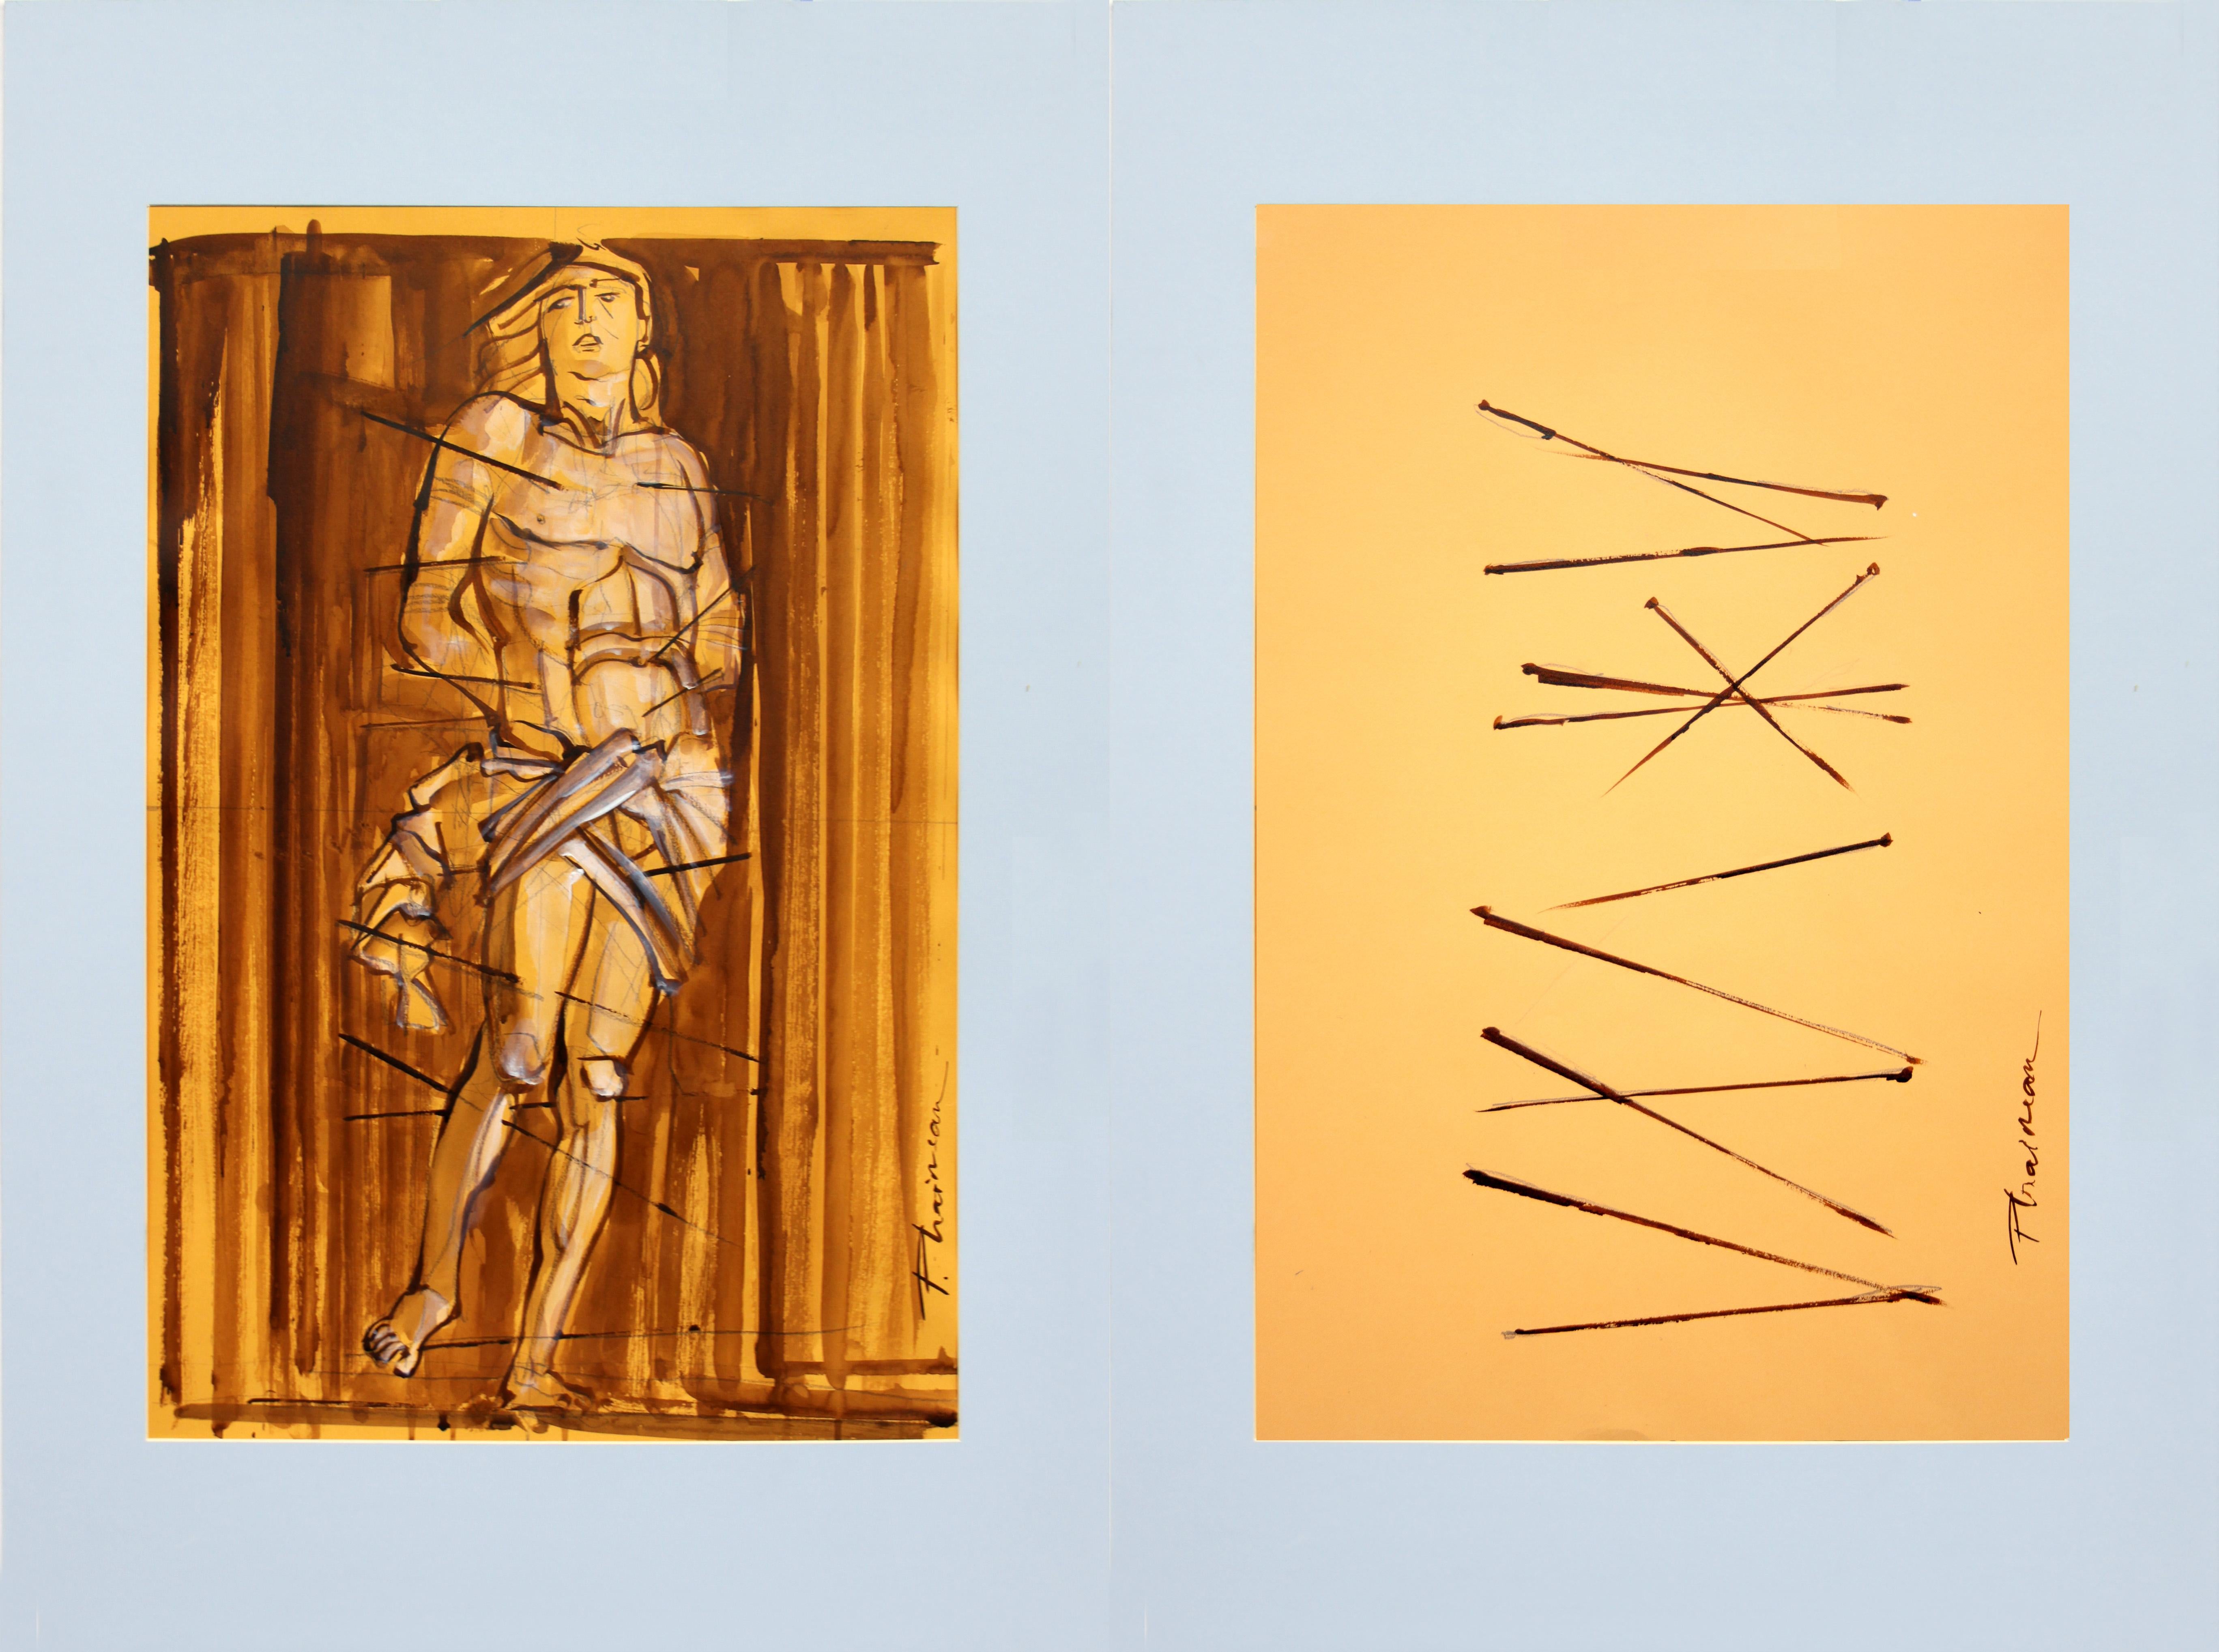 "Arrows of St Sebastian" diptych 2 sepia ink drawings by Paula Craioveanu

This is a set of 2ink drawings, showing in a modern vision the martyrdom of St Sebastian.
These 2 drawings will be shipped rolled in a tube, well packed. 
In mat for display